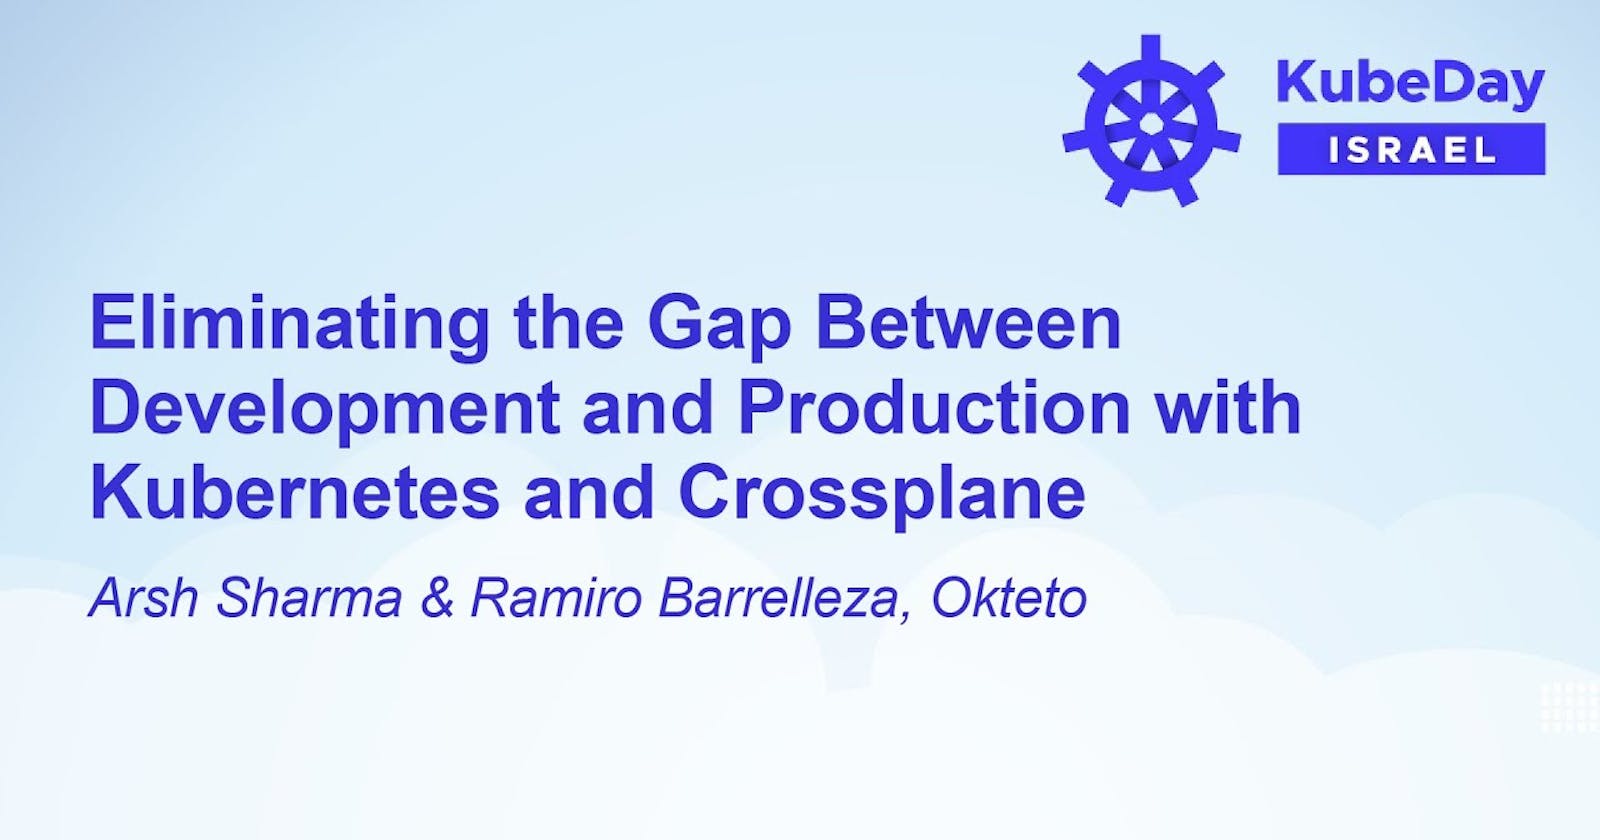 Eliminating the Gap Between Development and Production with Kubernetes and Crossplane